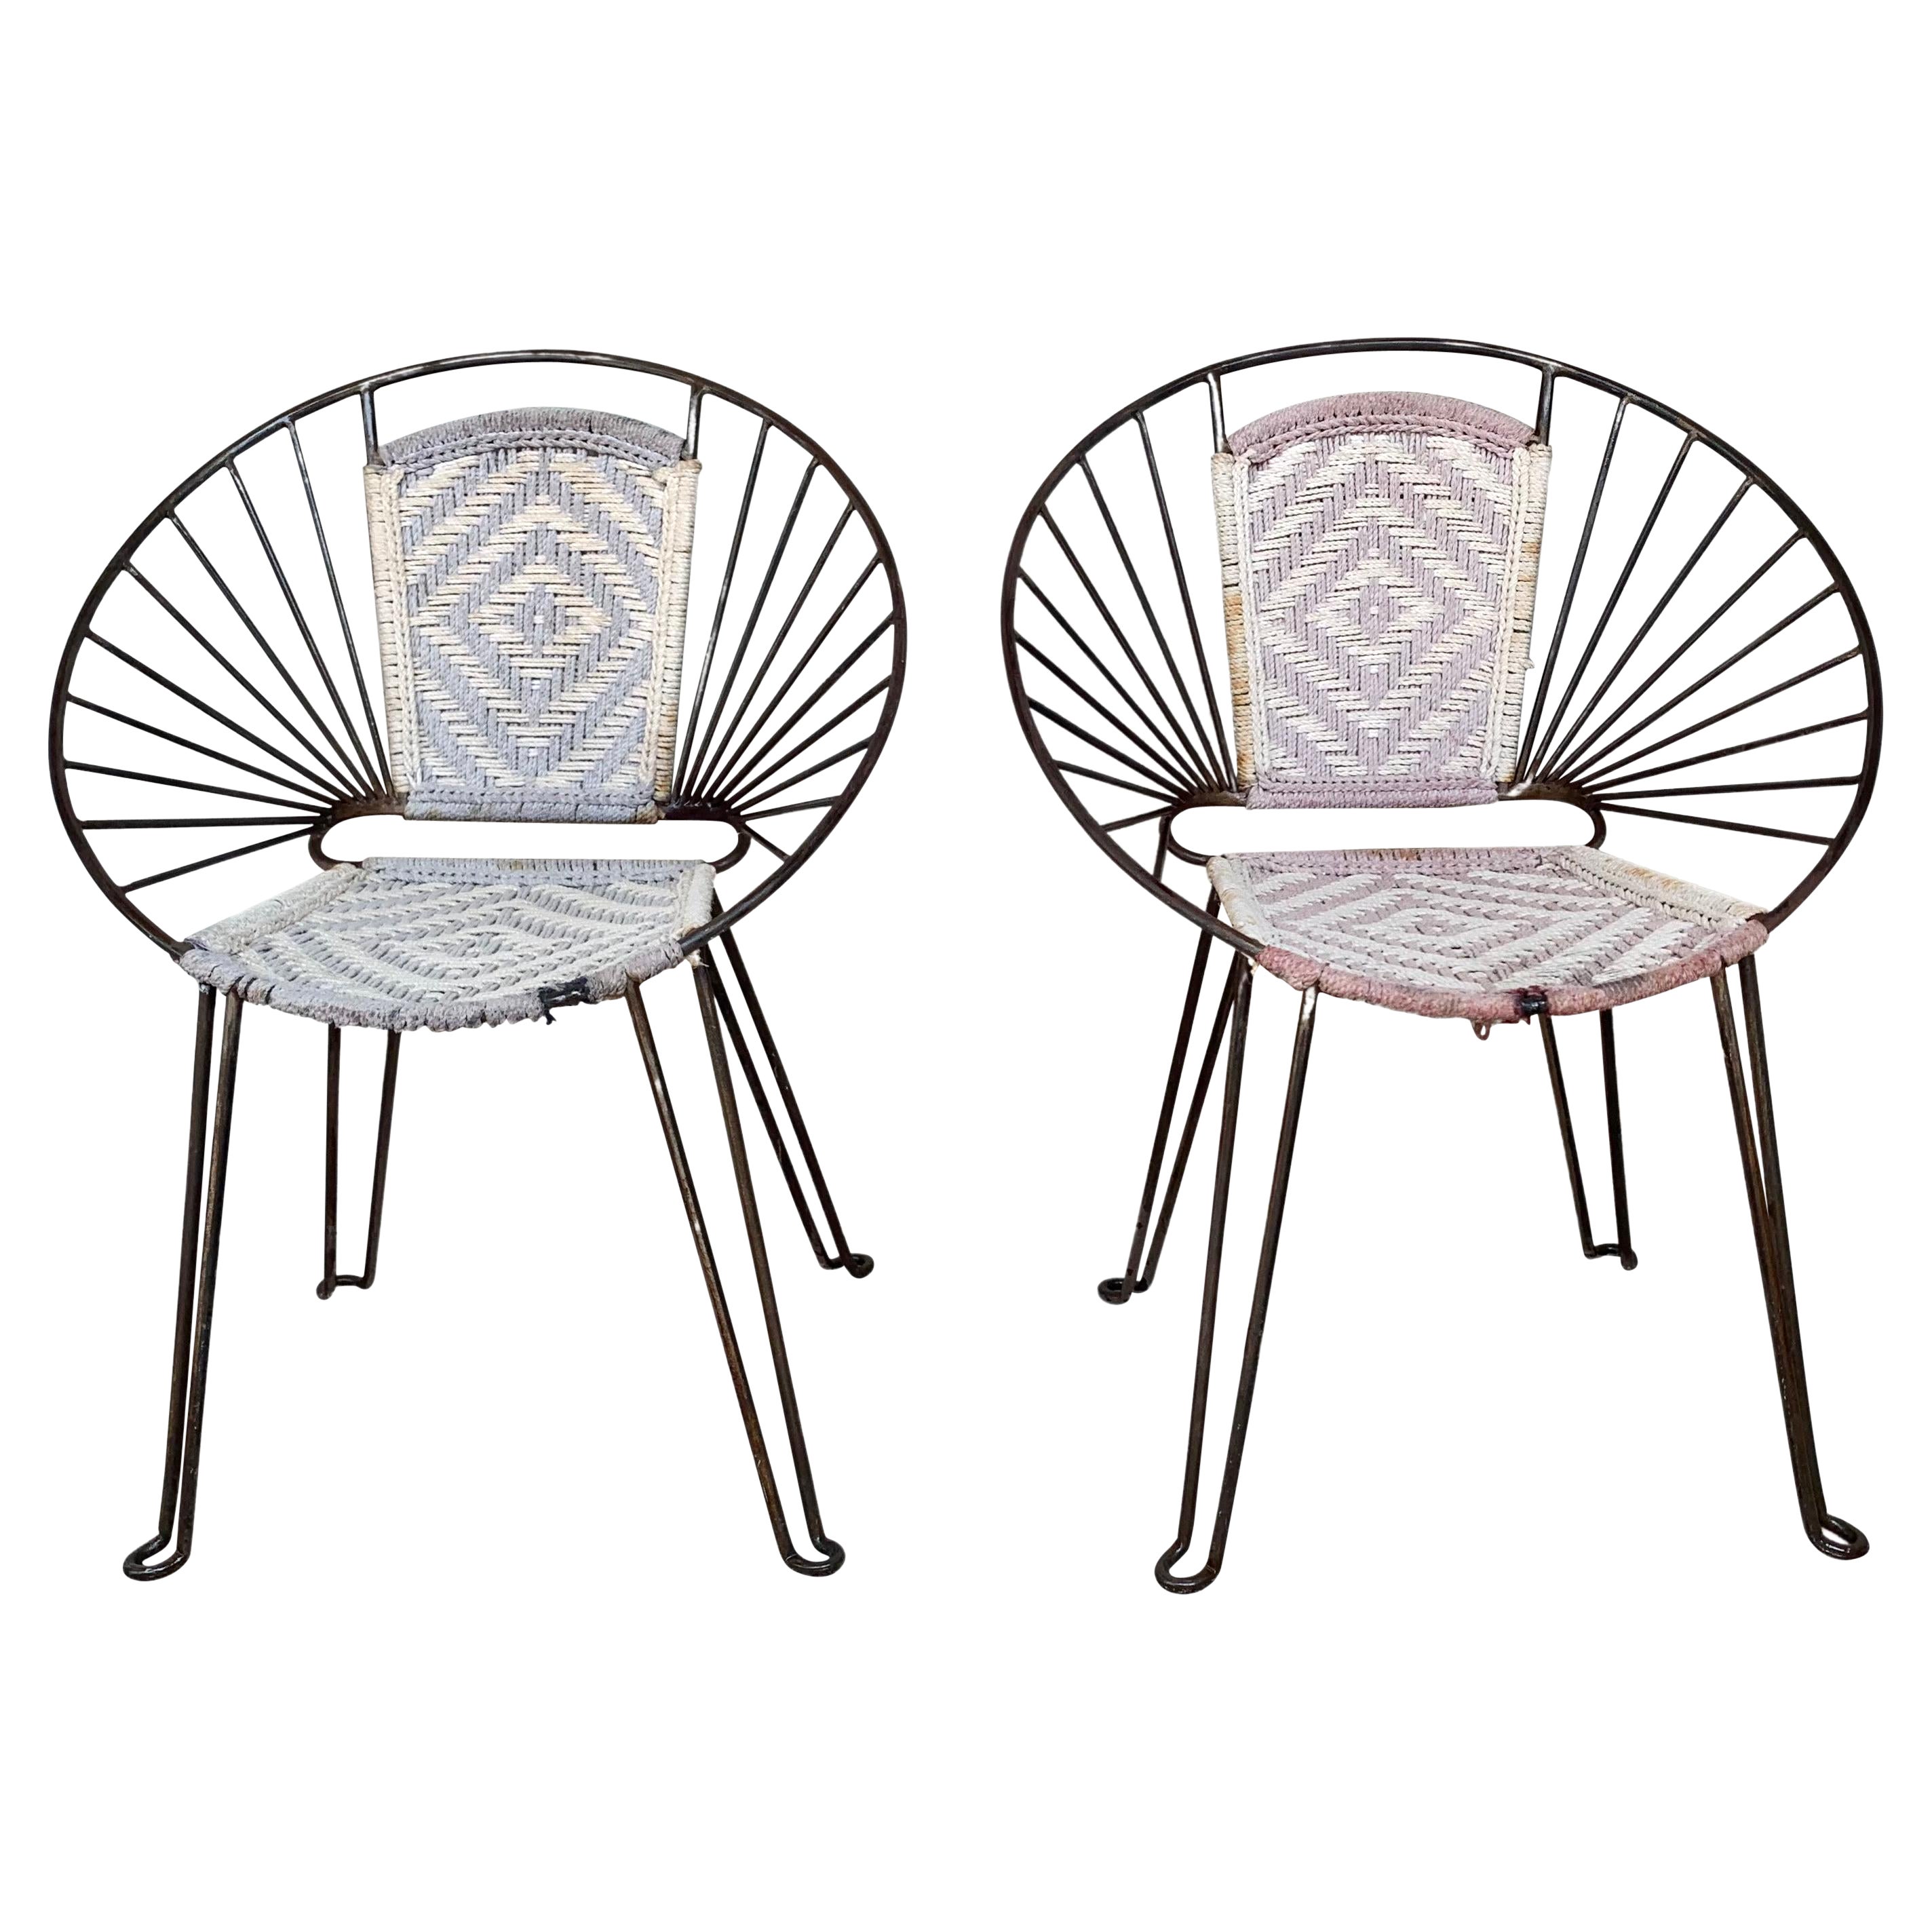 Pair Mid-Century Hoop Chairs with Caned Seat and Back For Sale